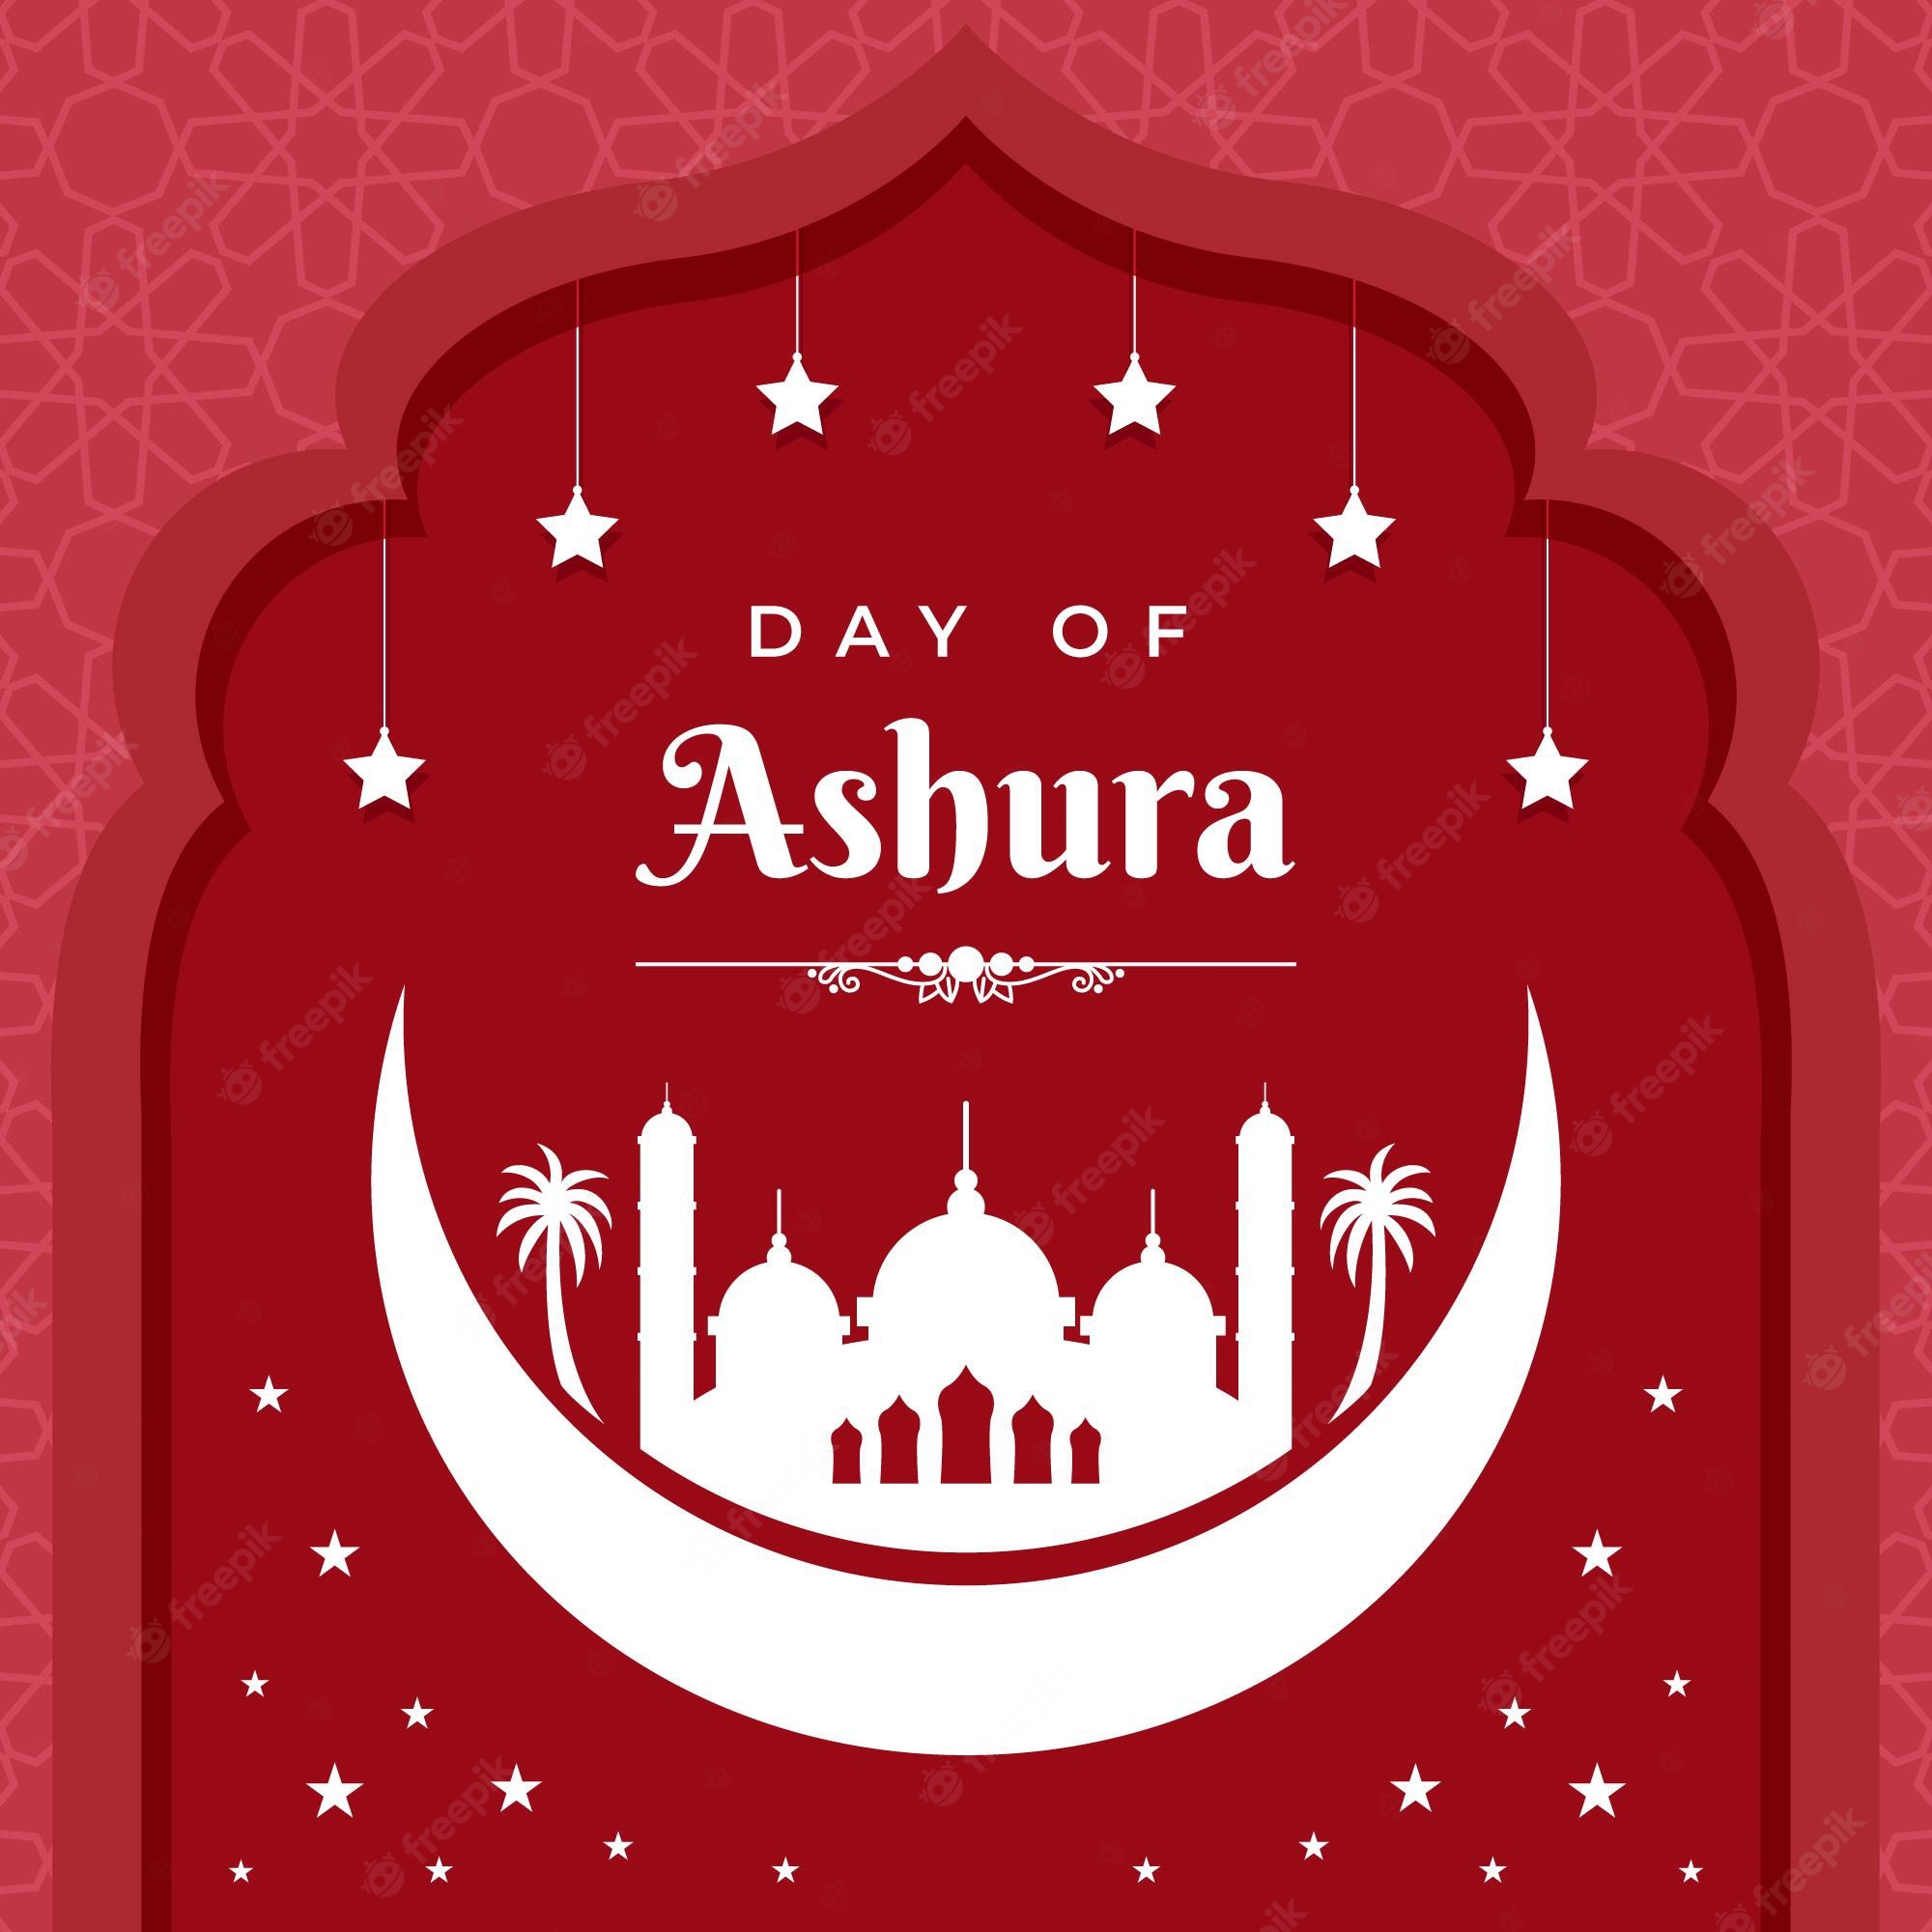 Fasting the day of Ashura,